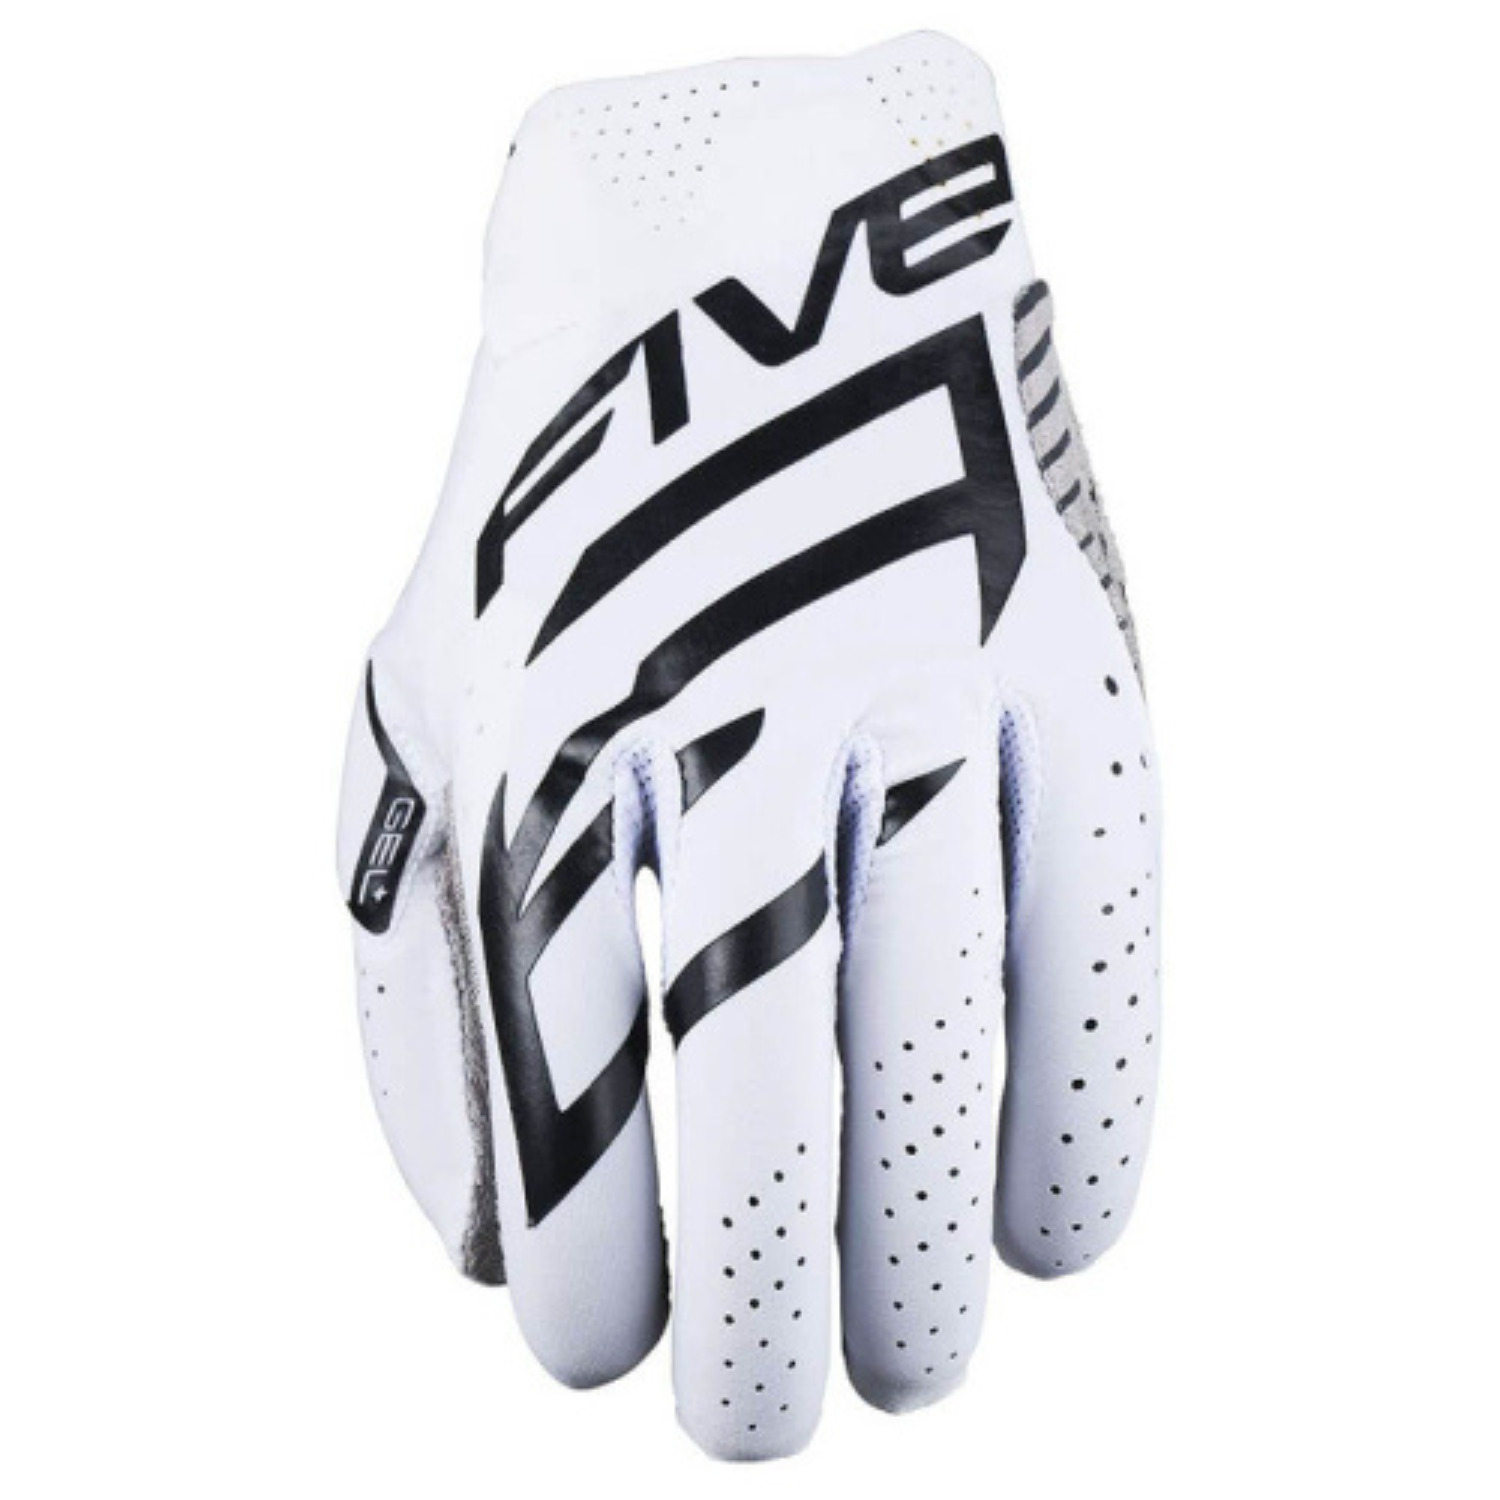 Image of Five MXF Race Gloves White Black Size M ID 3841300111600